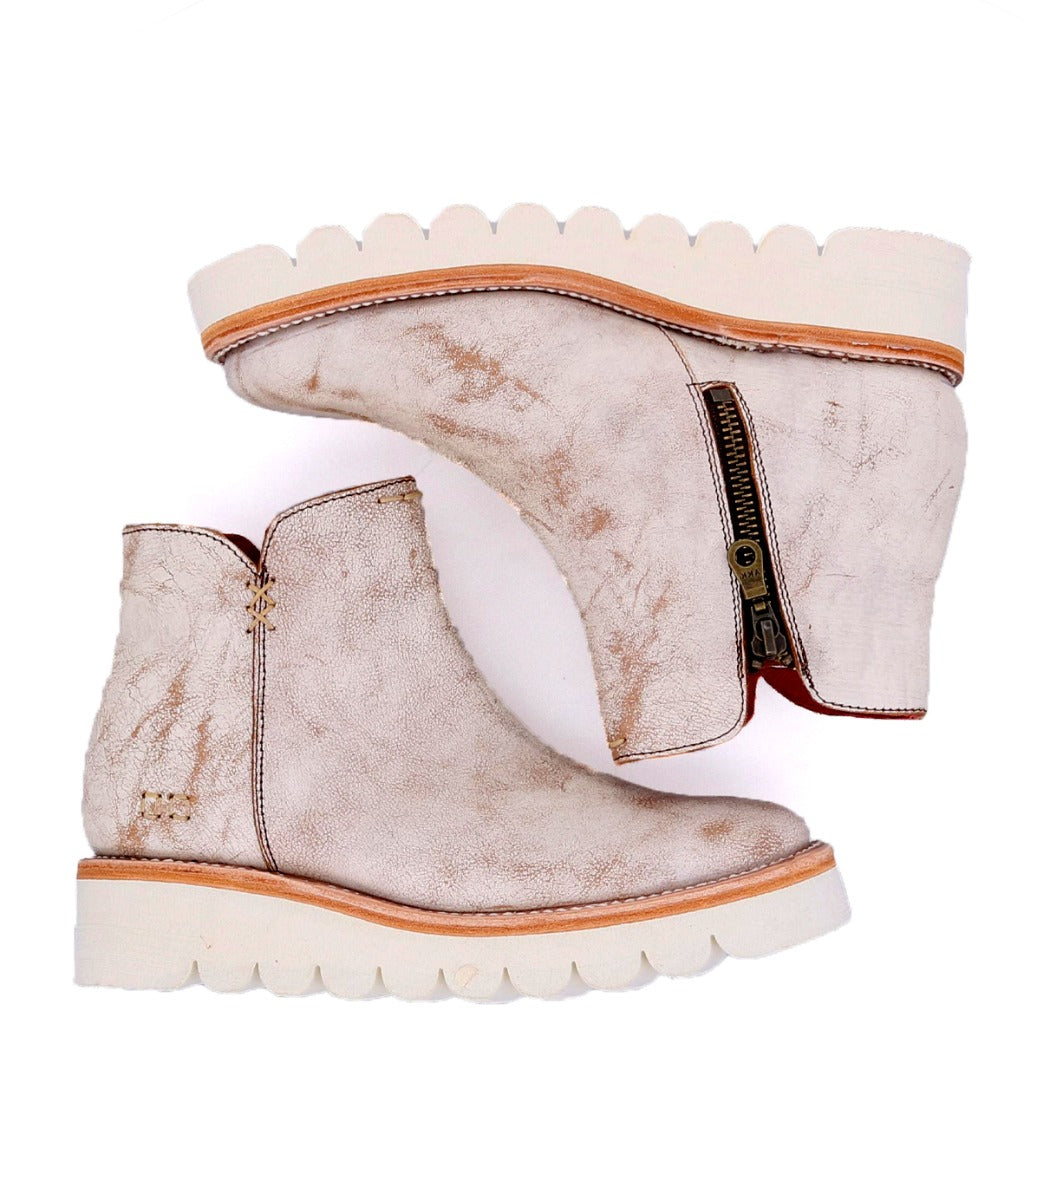 A pair of Lydyi ankle boots by Bed Stu with white soles.